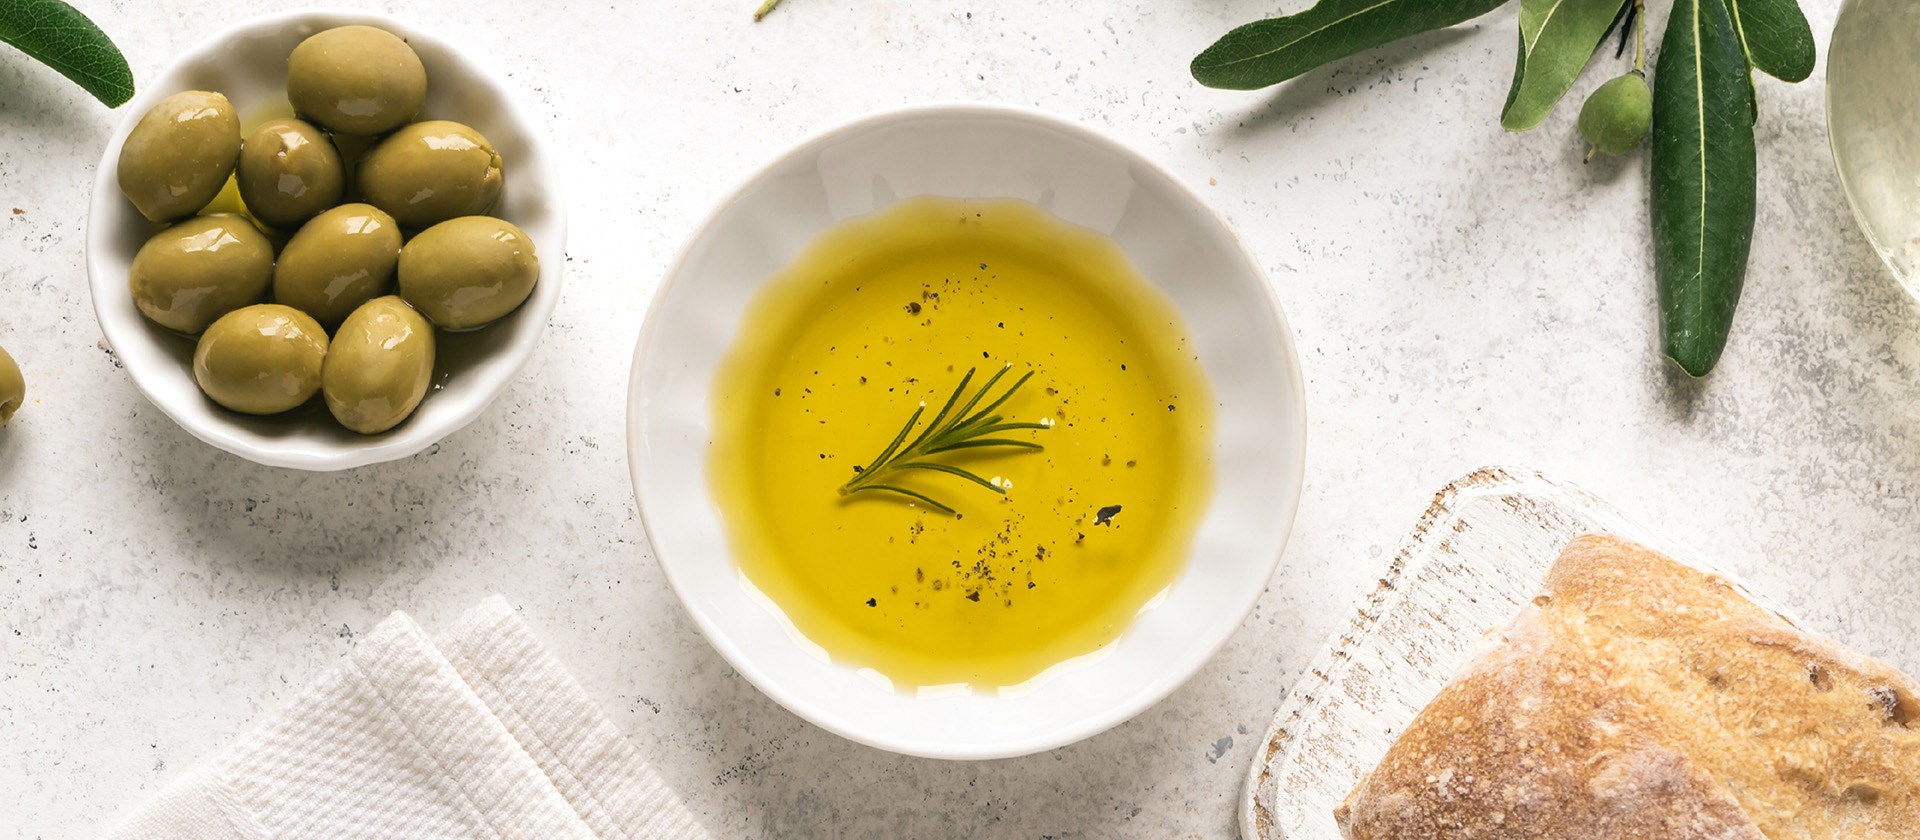 NovaVera | Award-Winning Olive Oil & Local Products and Prices